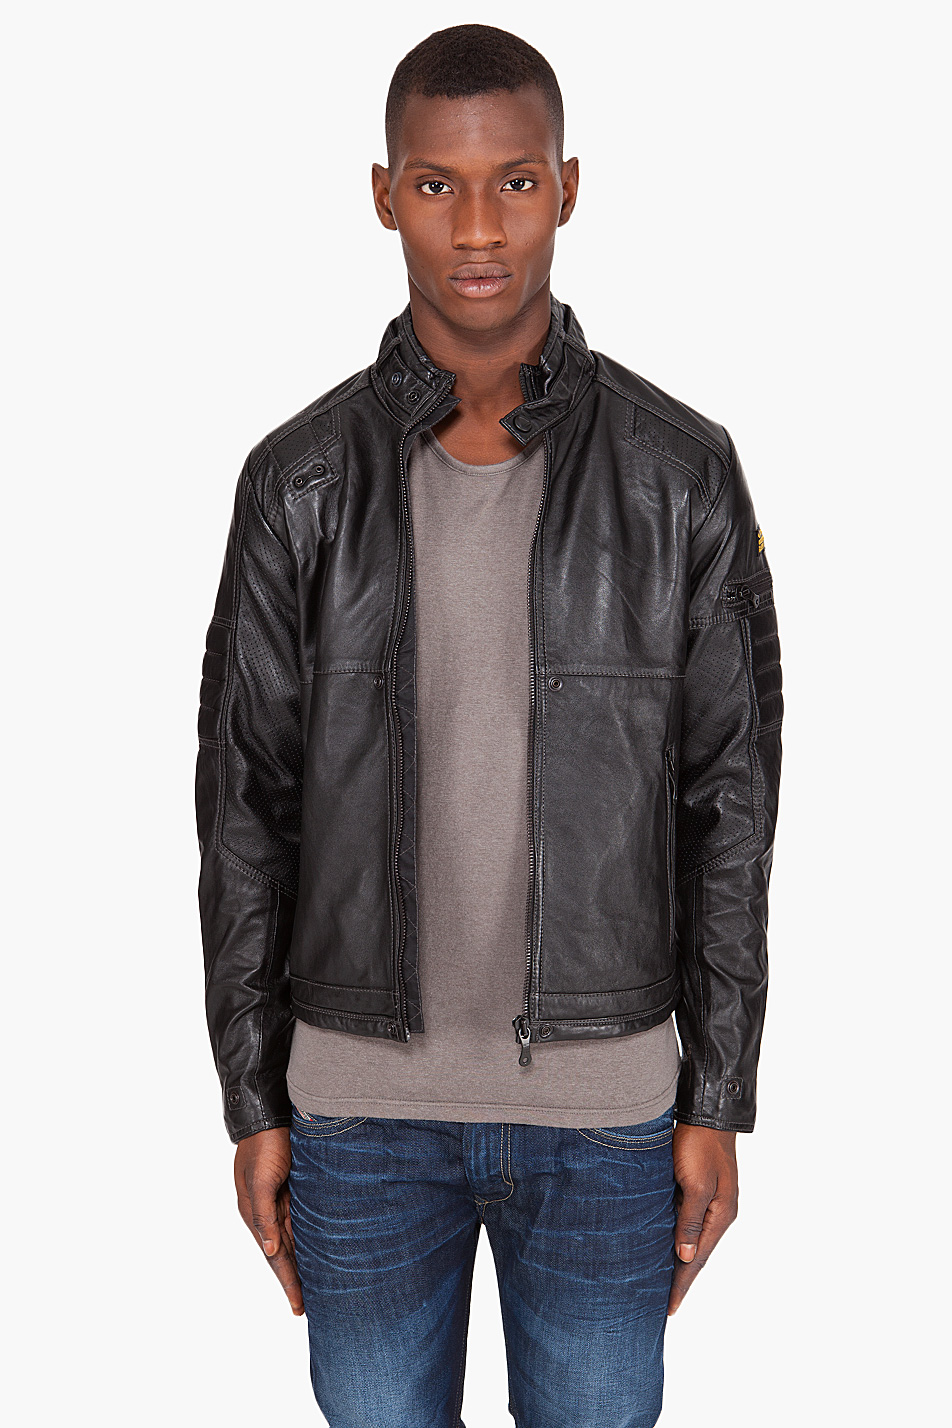 Lyst - G-Star Raw Mfd Leather Jacket in Black for Men